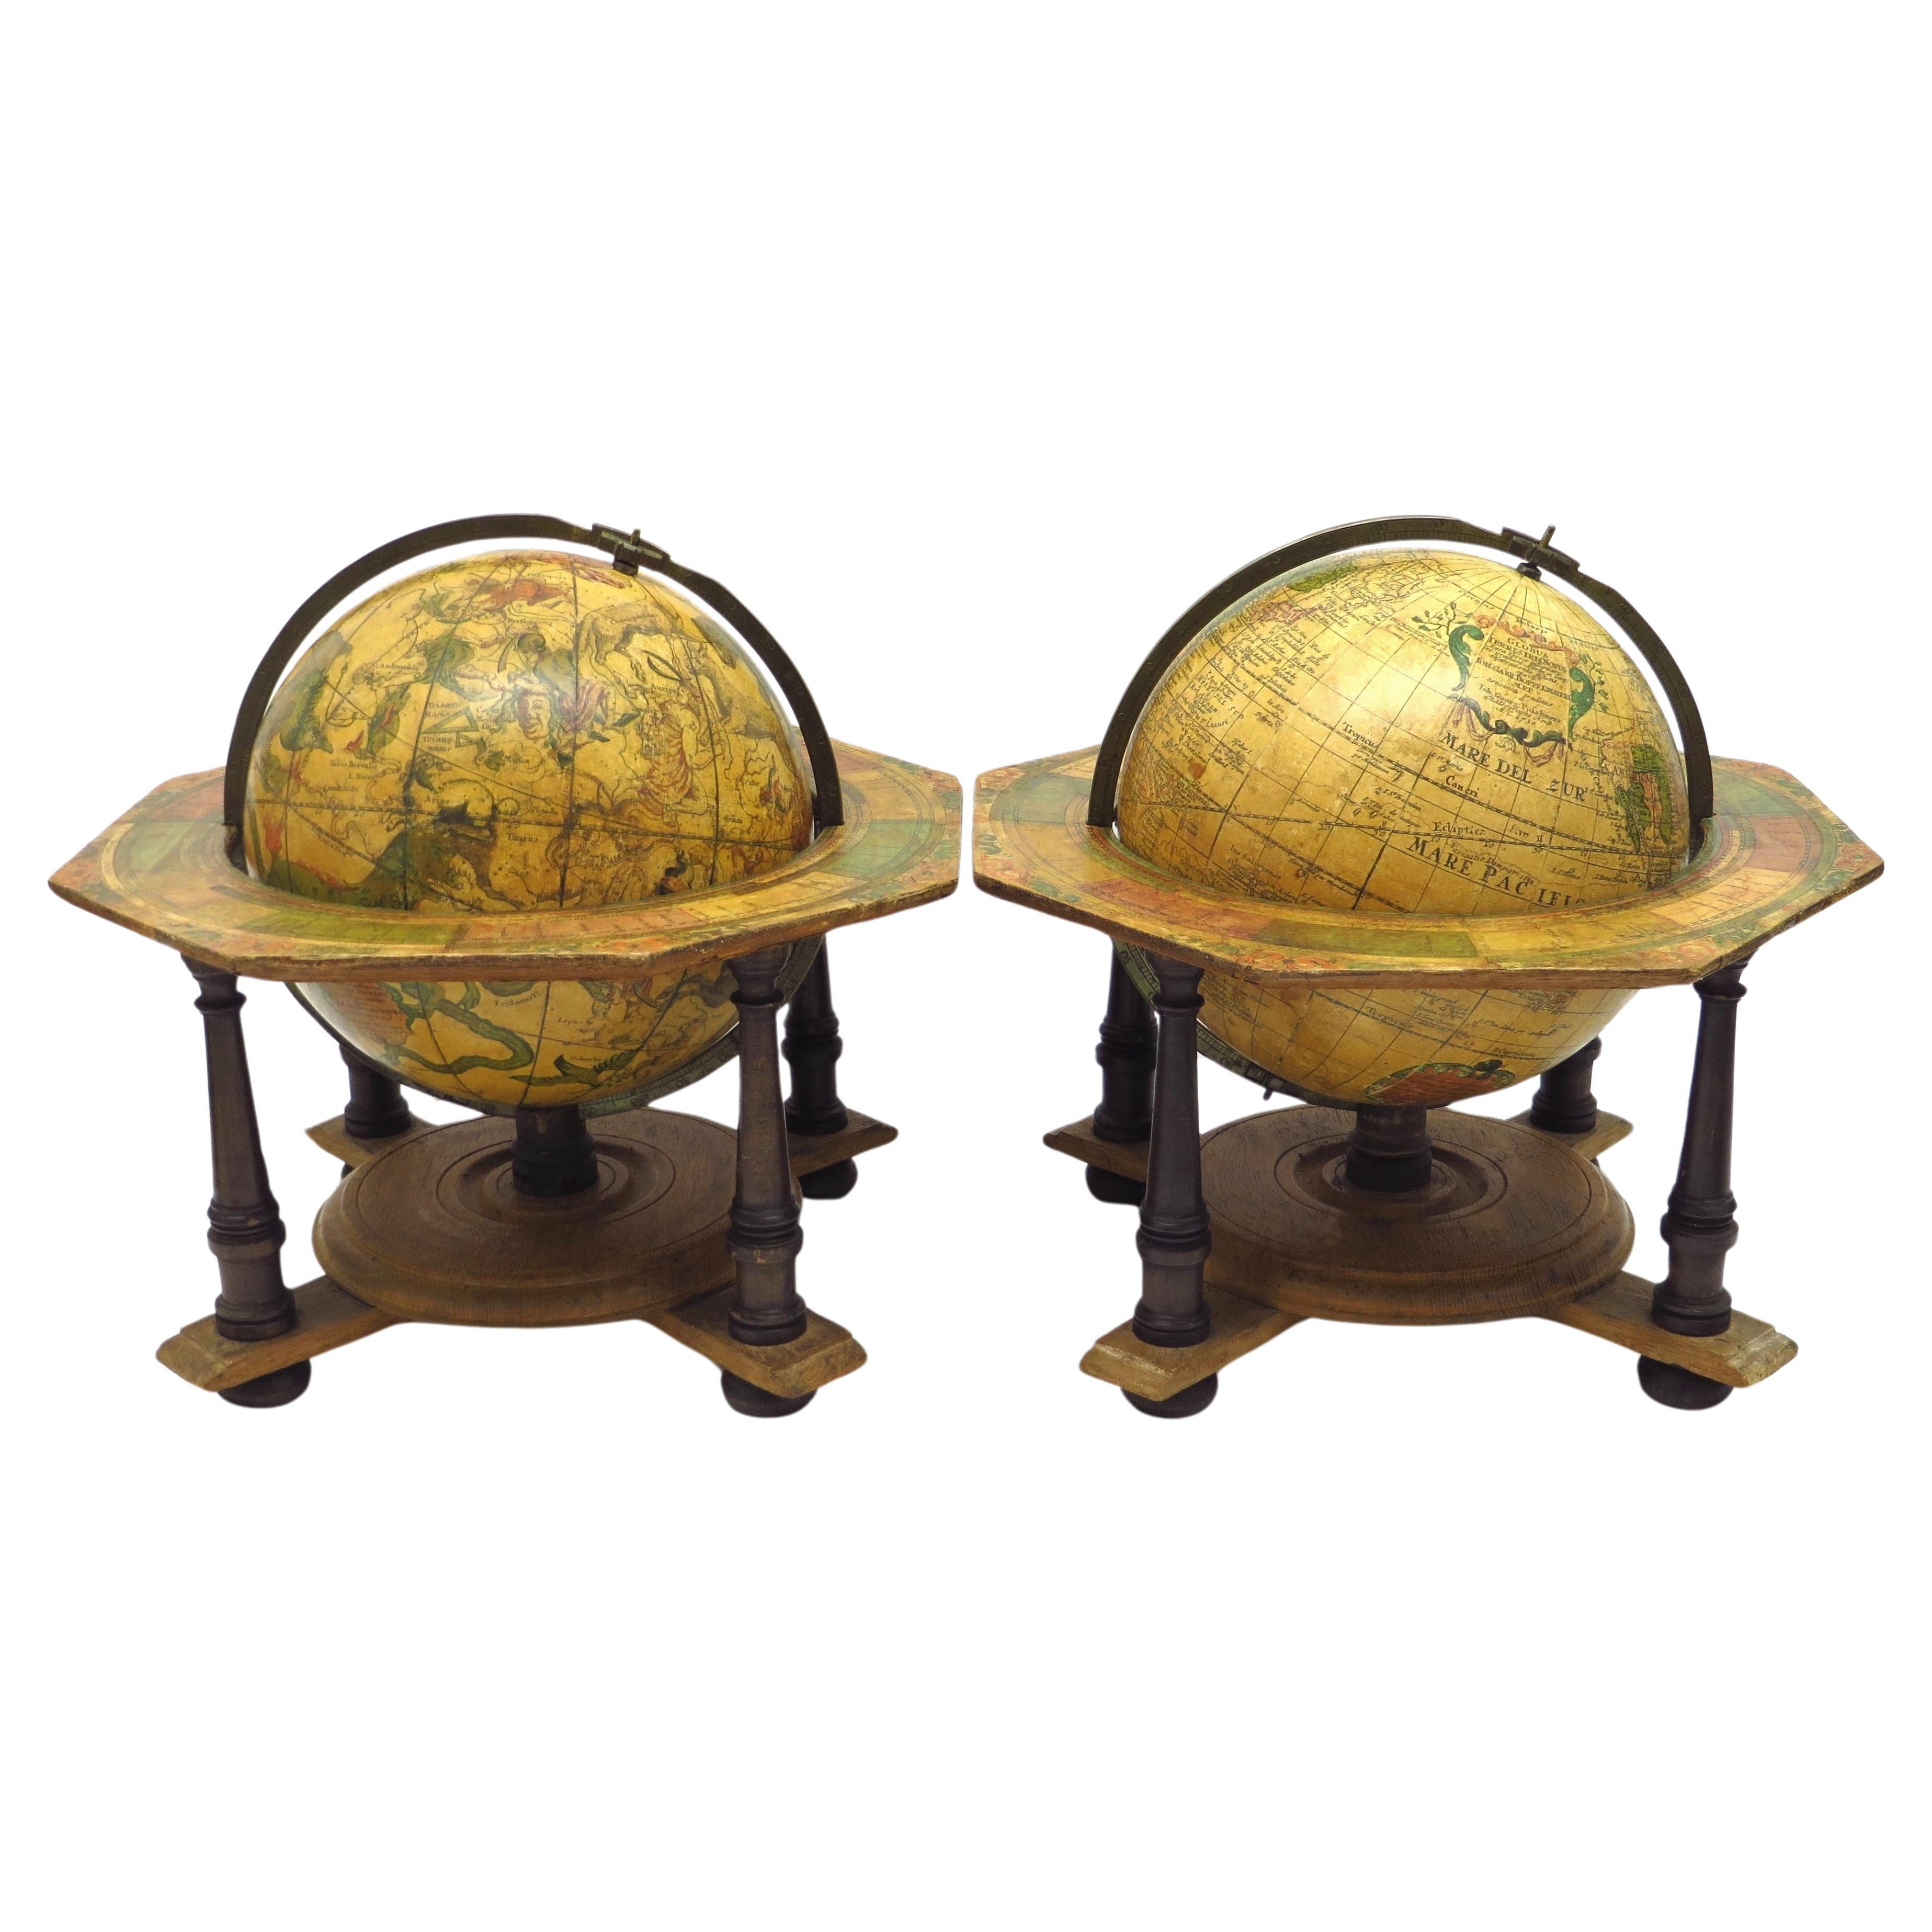 A decorative pair of rare table globes in a fine condition. For Sale